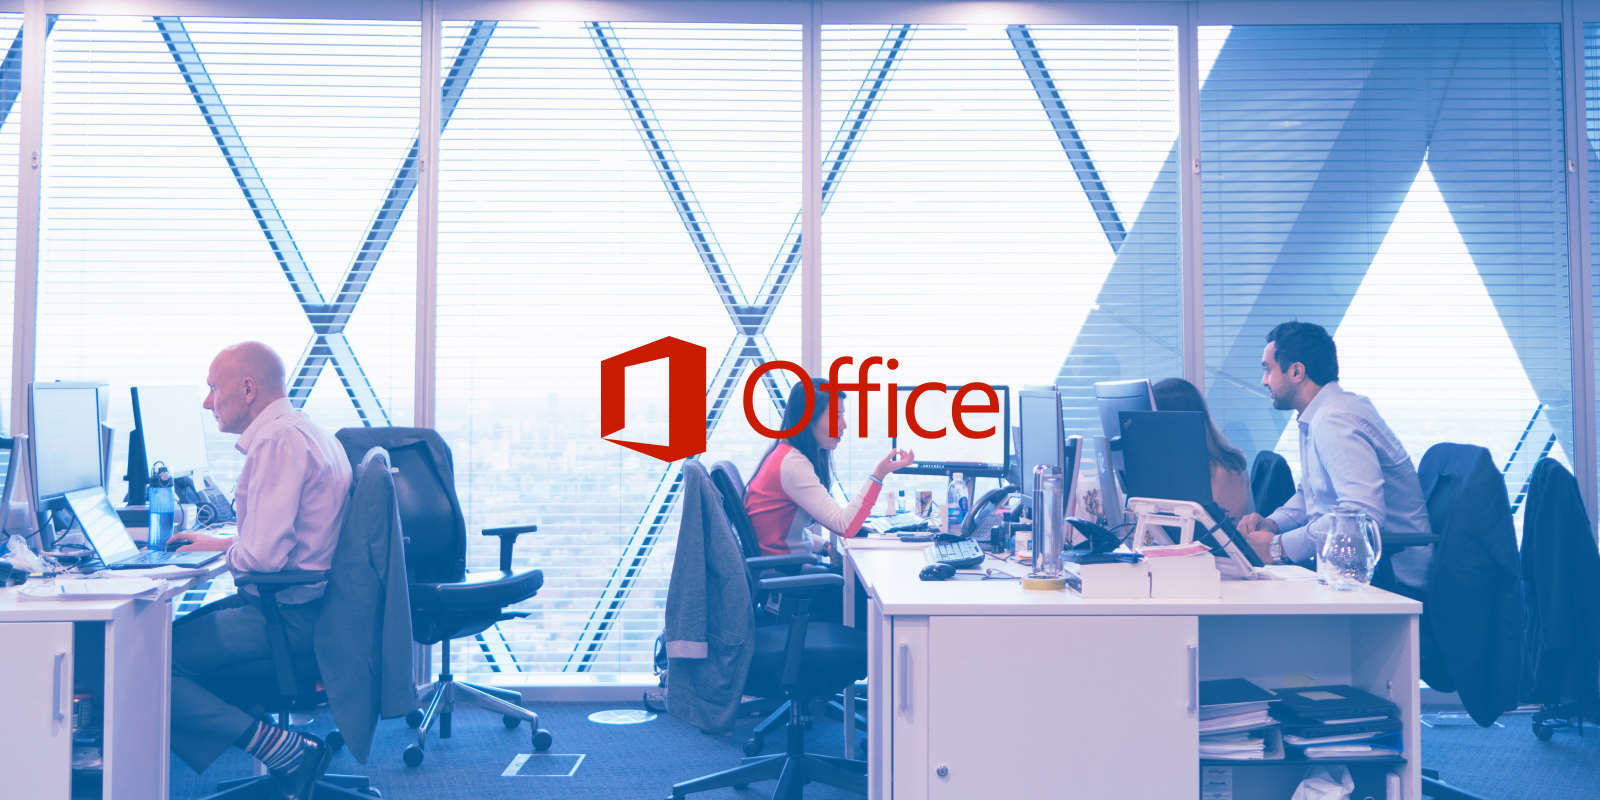 Say Goodbye To Subscription Fees: Get Microsoft Office Apps Forever For Just $30